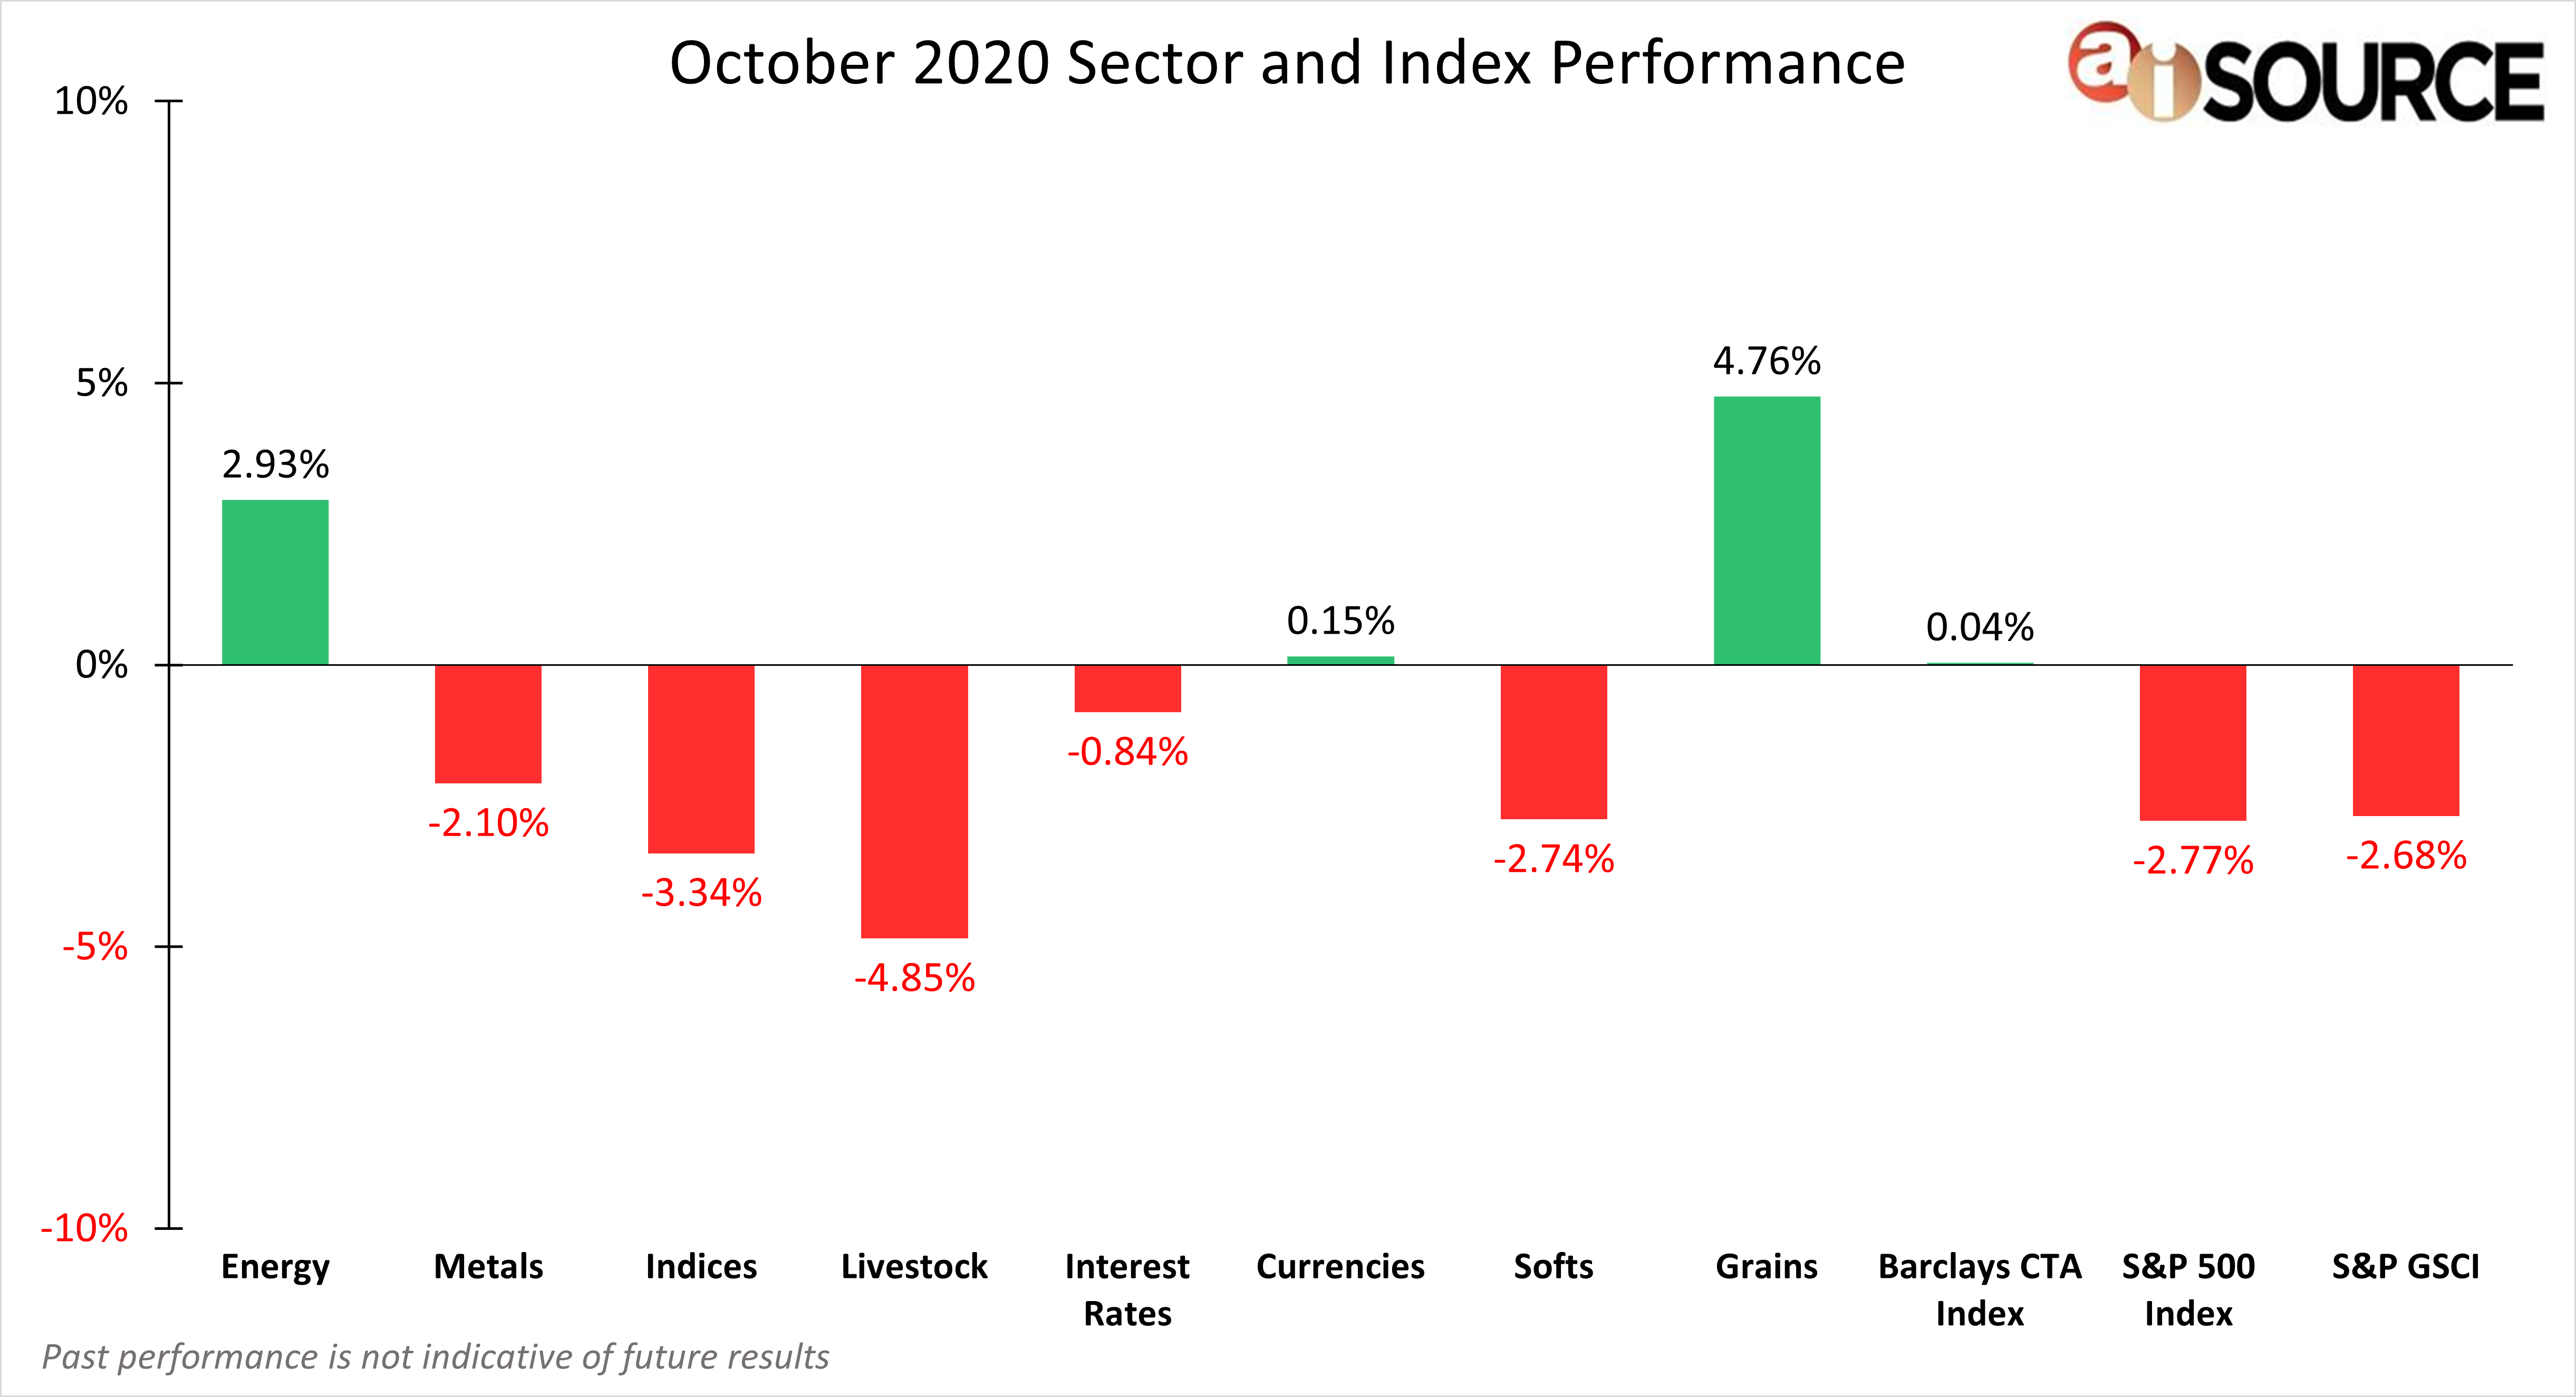 October 2020 Sector and Index Performance